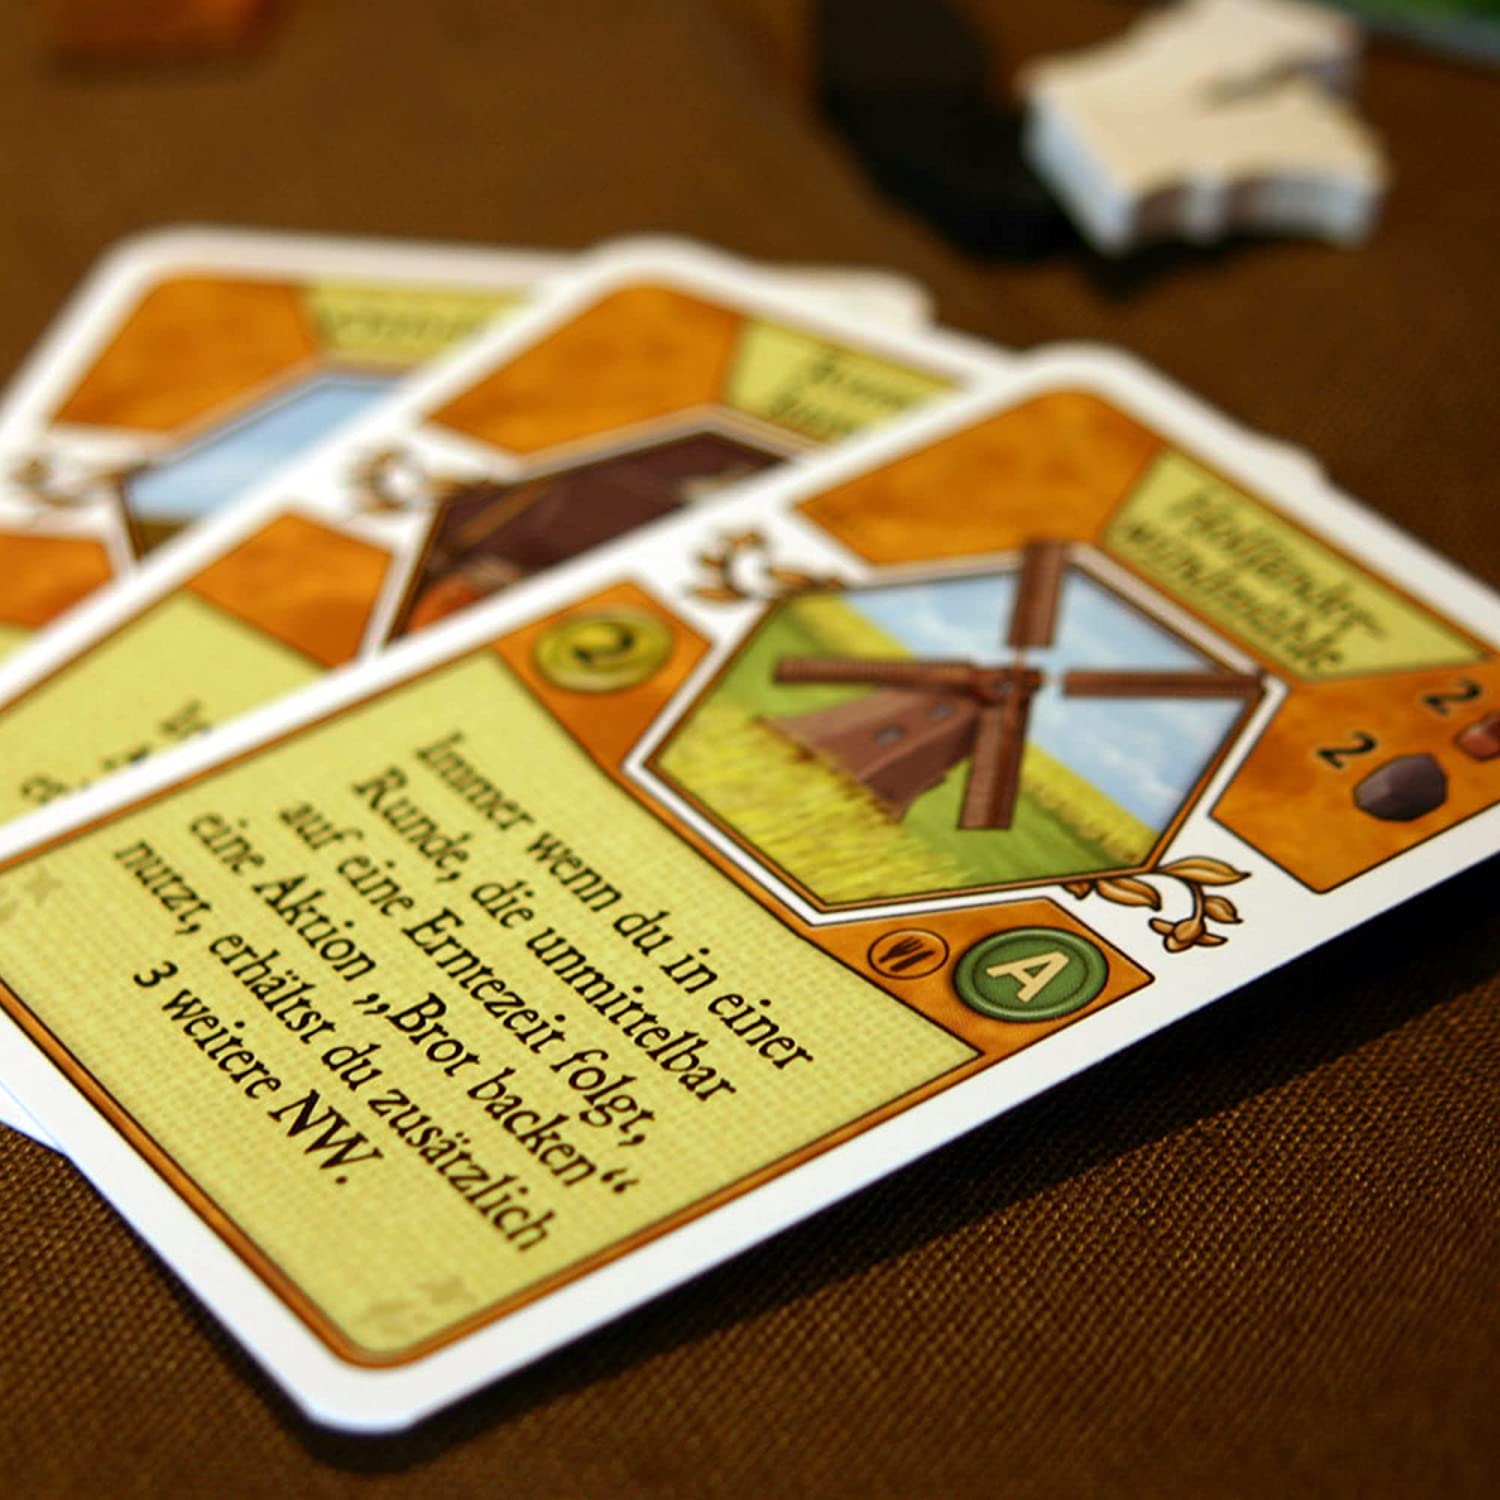 Agricola (2007) cards